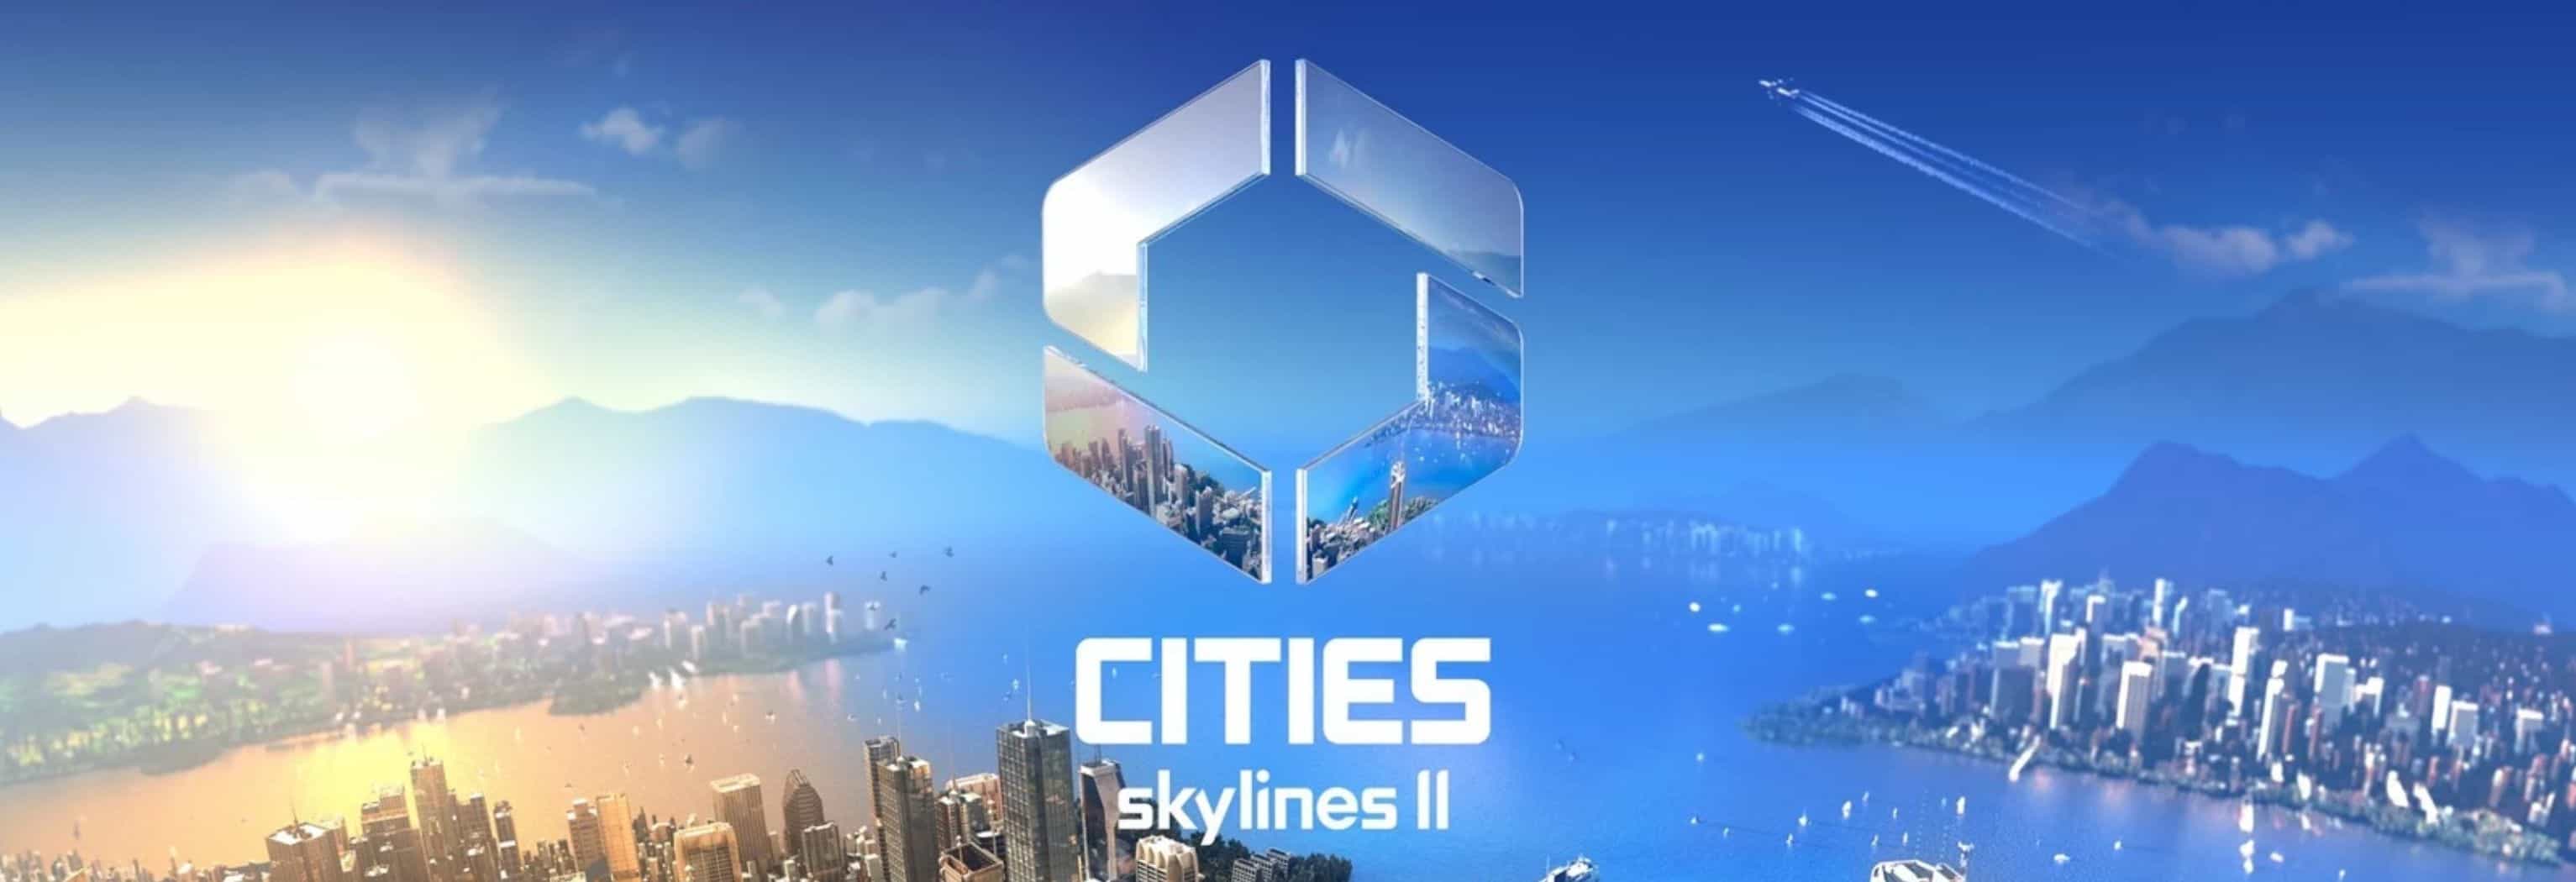 Cities: Skylines II System Requirements